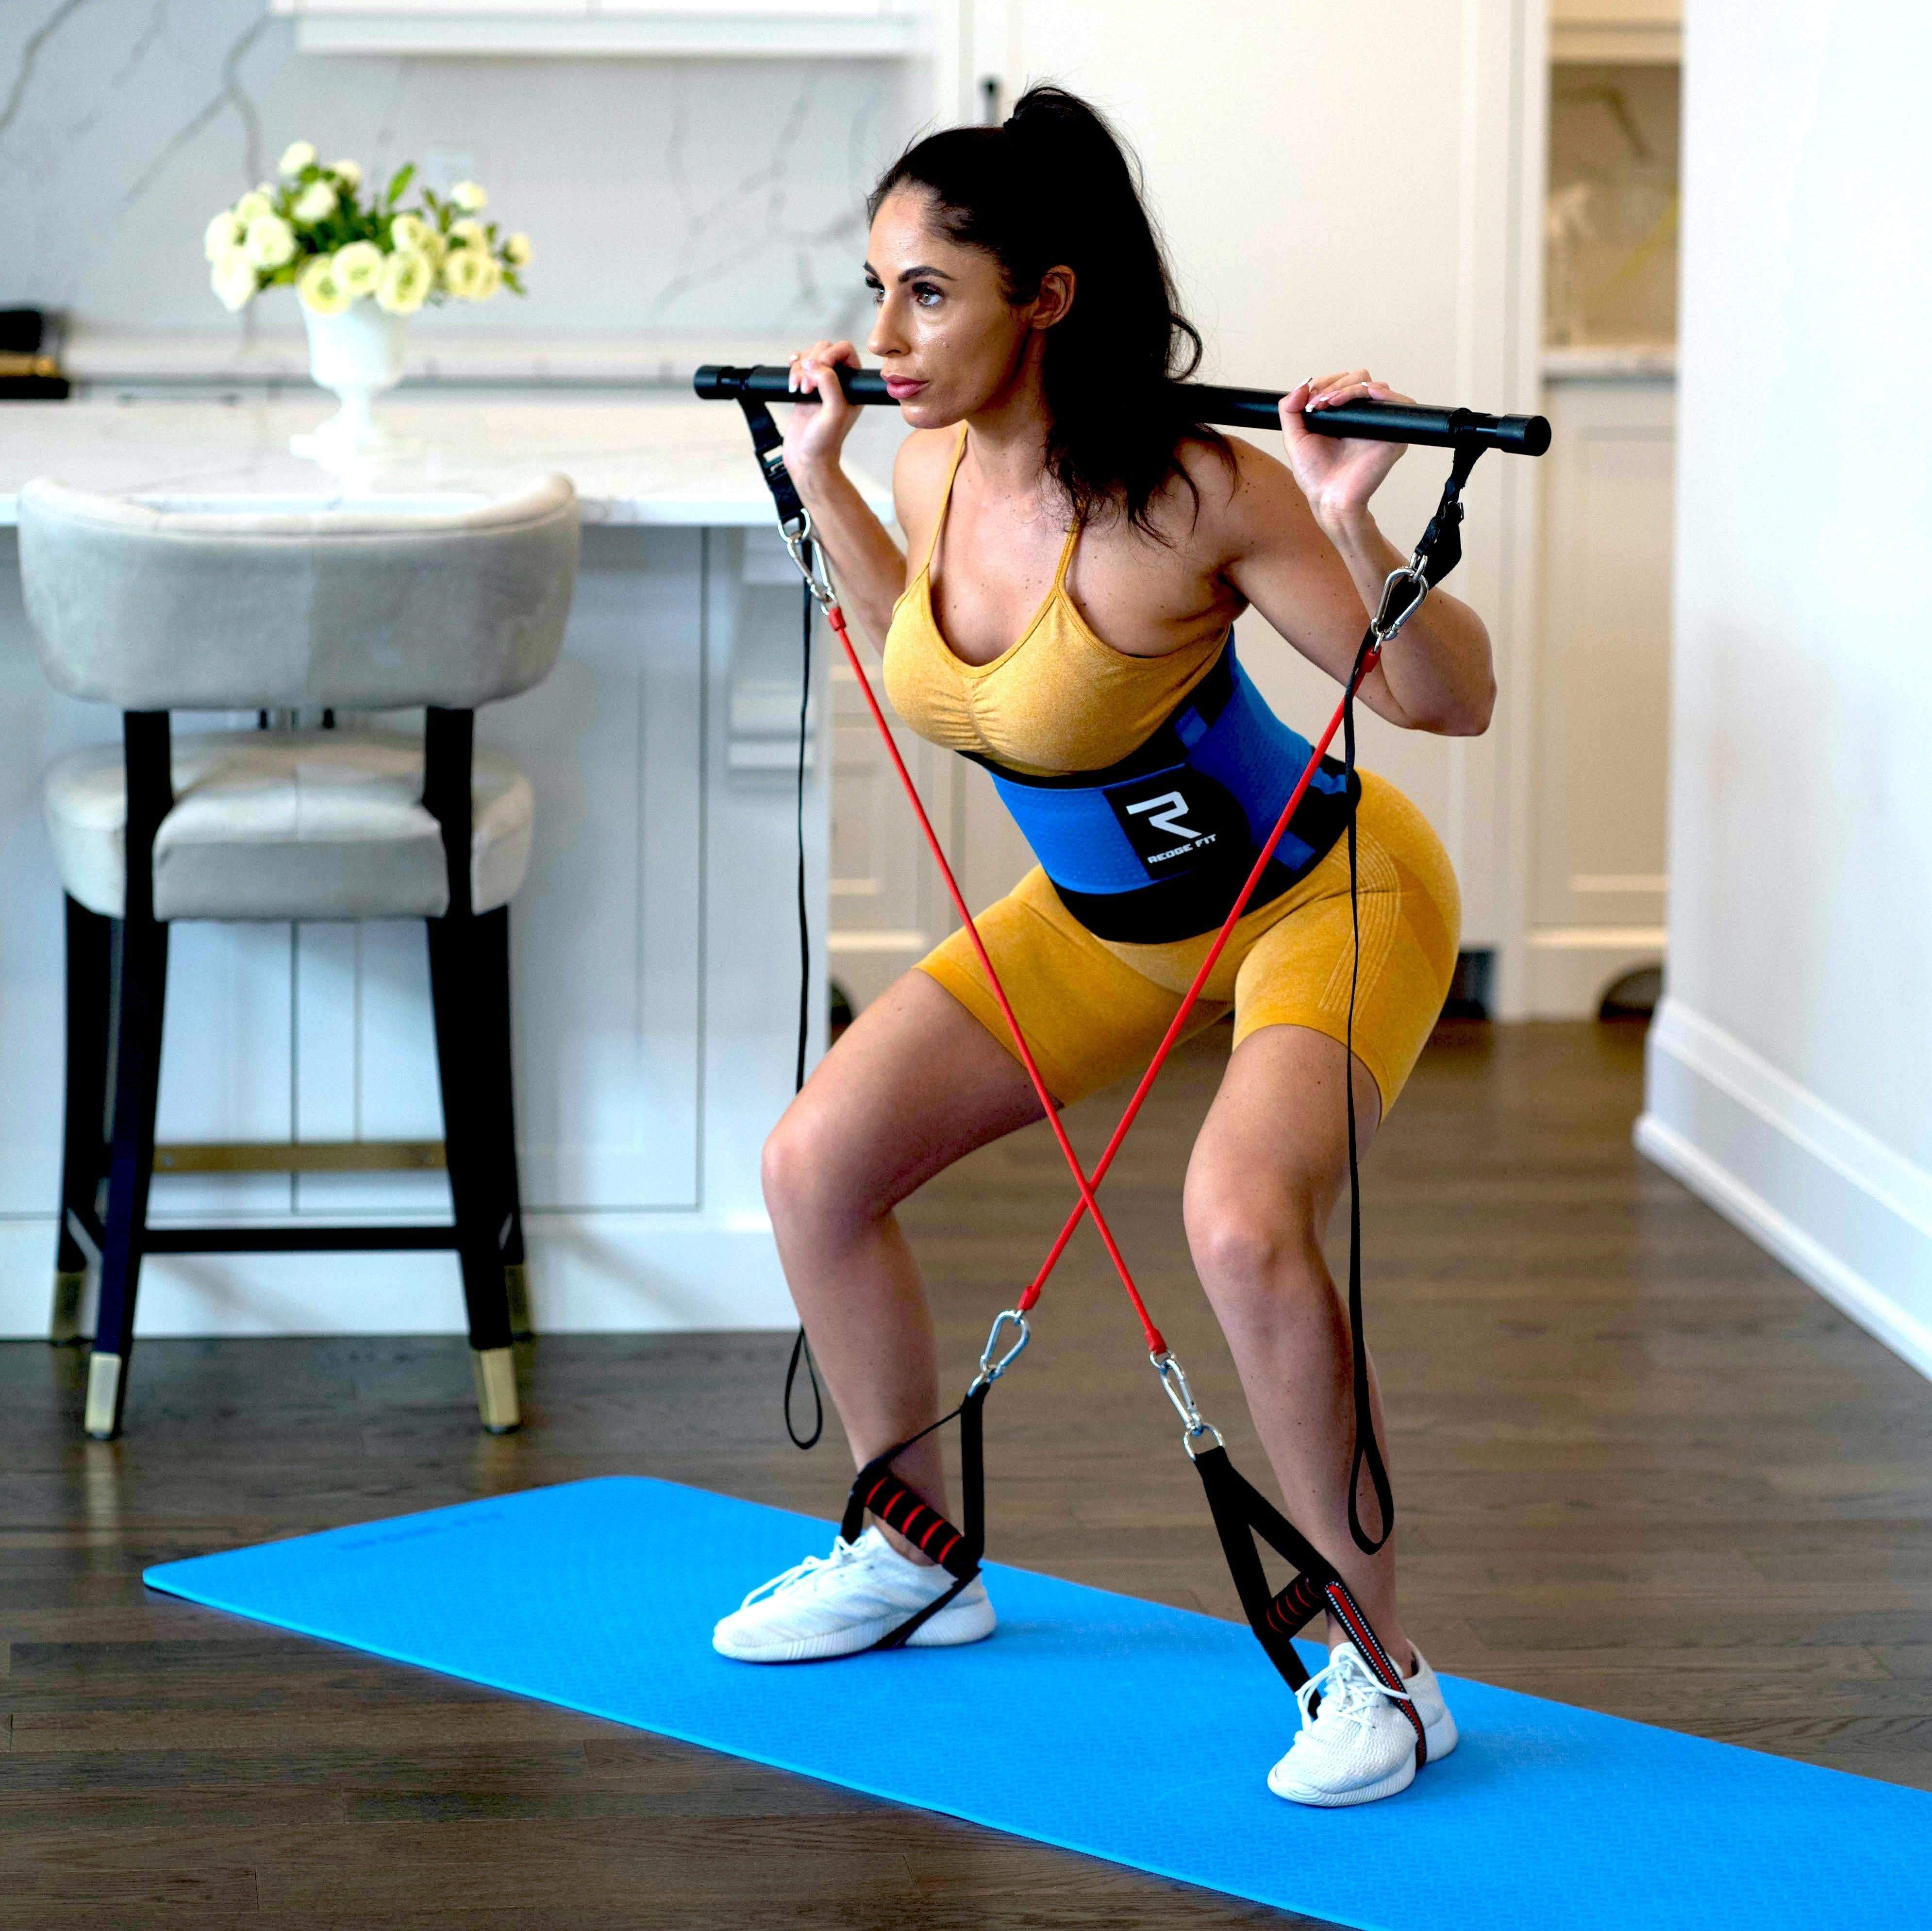 Woman modeling the Redge Fit Core Focus Pro Yoga Mat and Portable Gym Machine Available at https://www.getredge.com/products/core-pro-pack